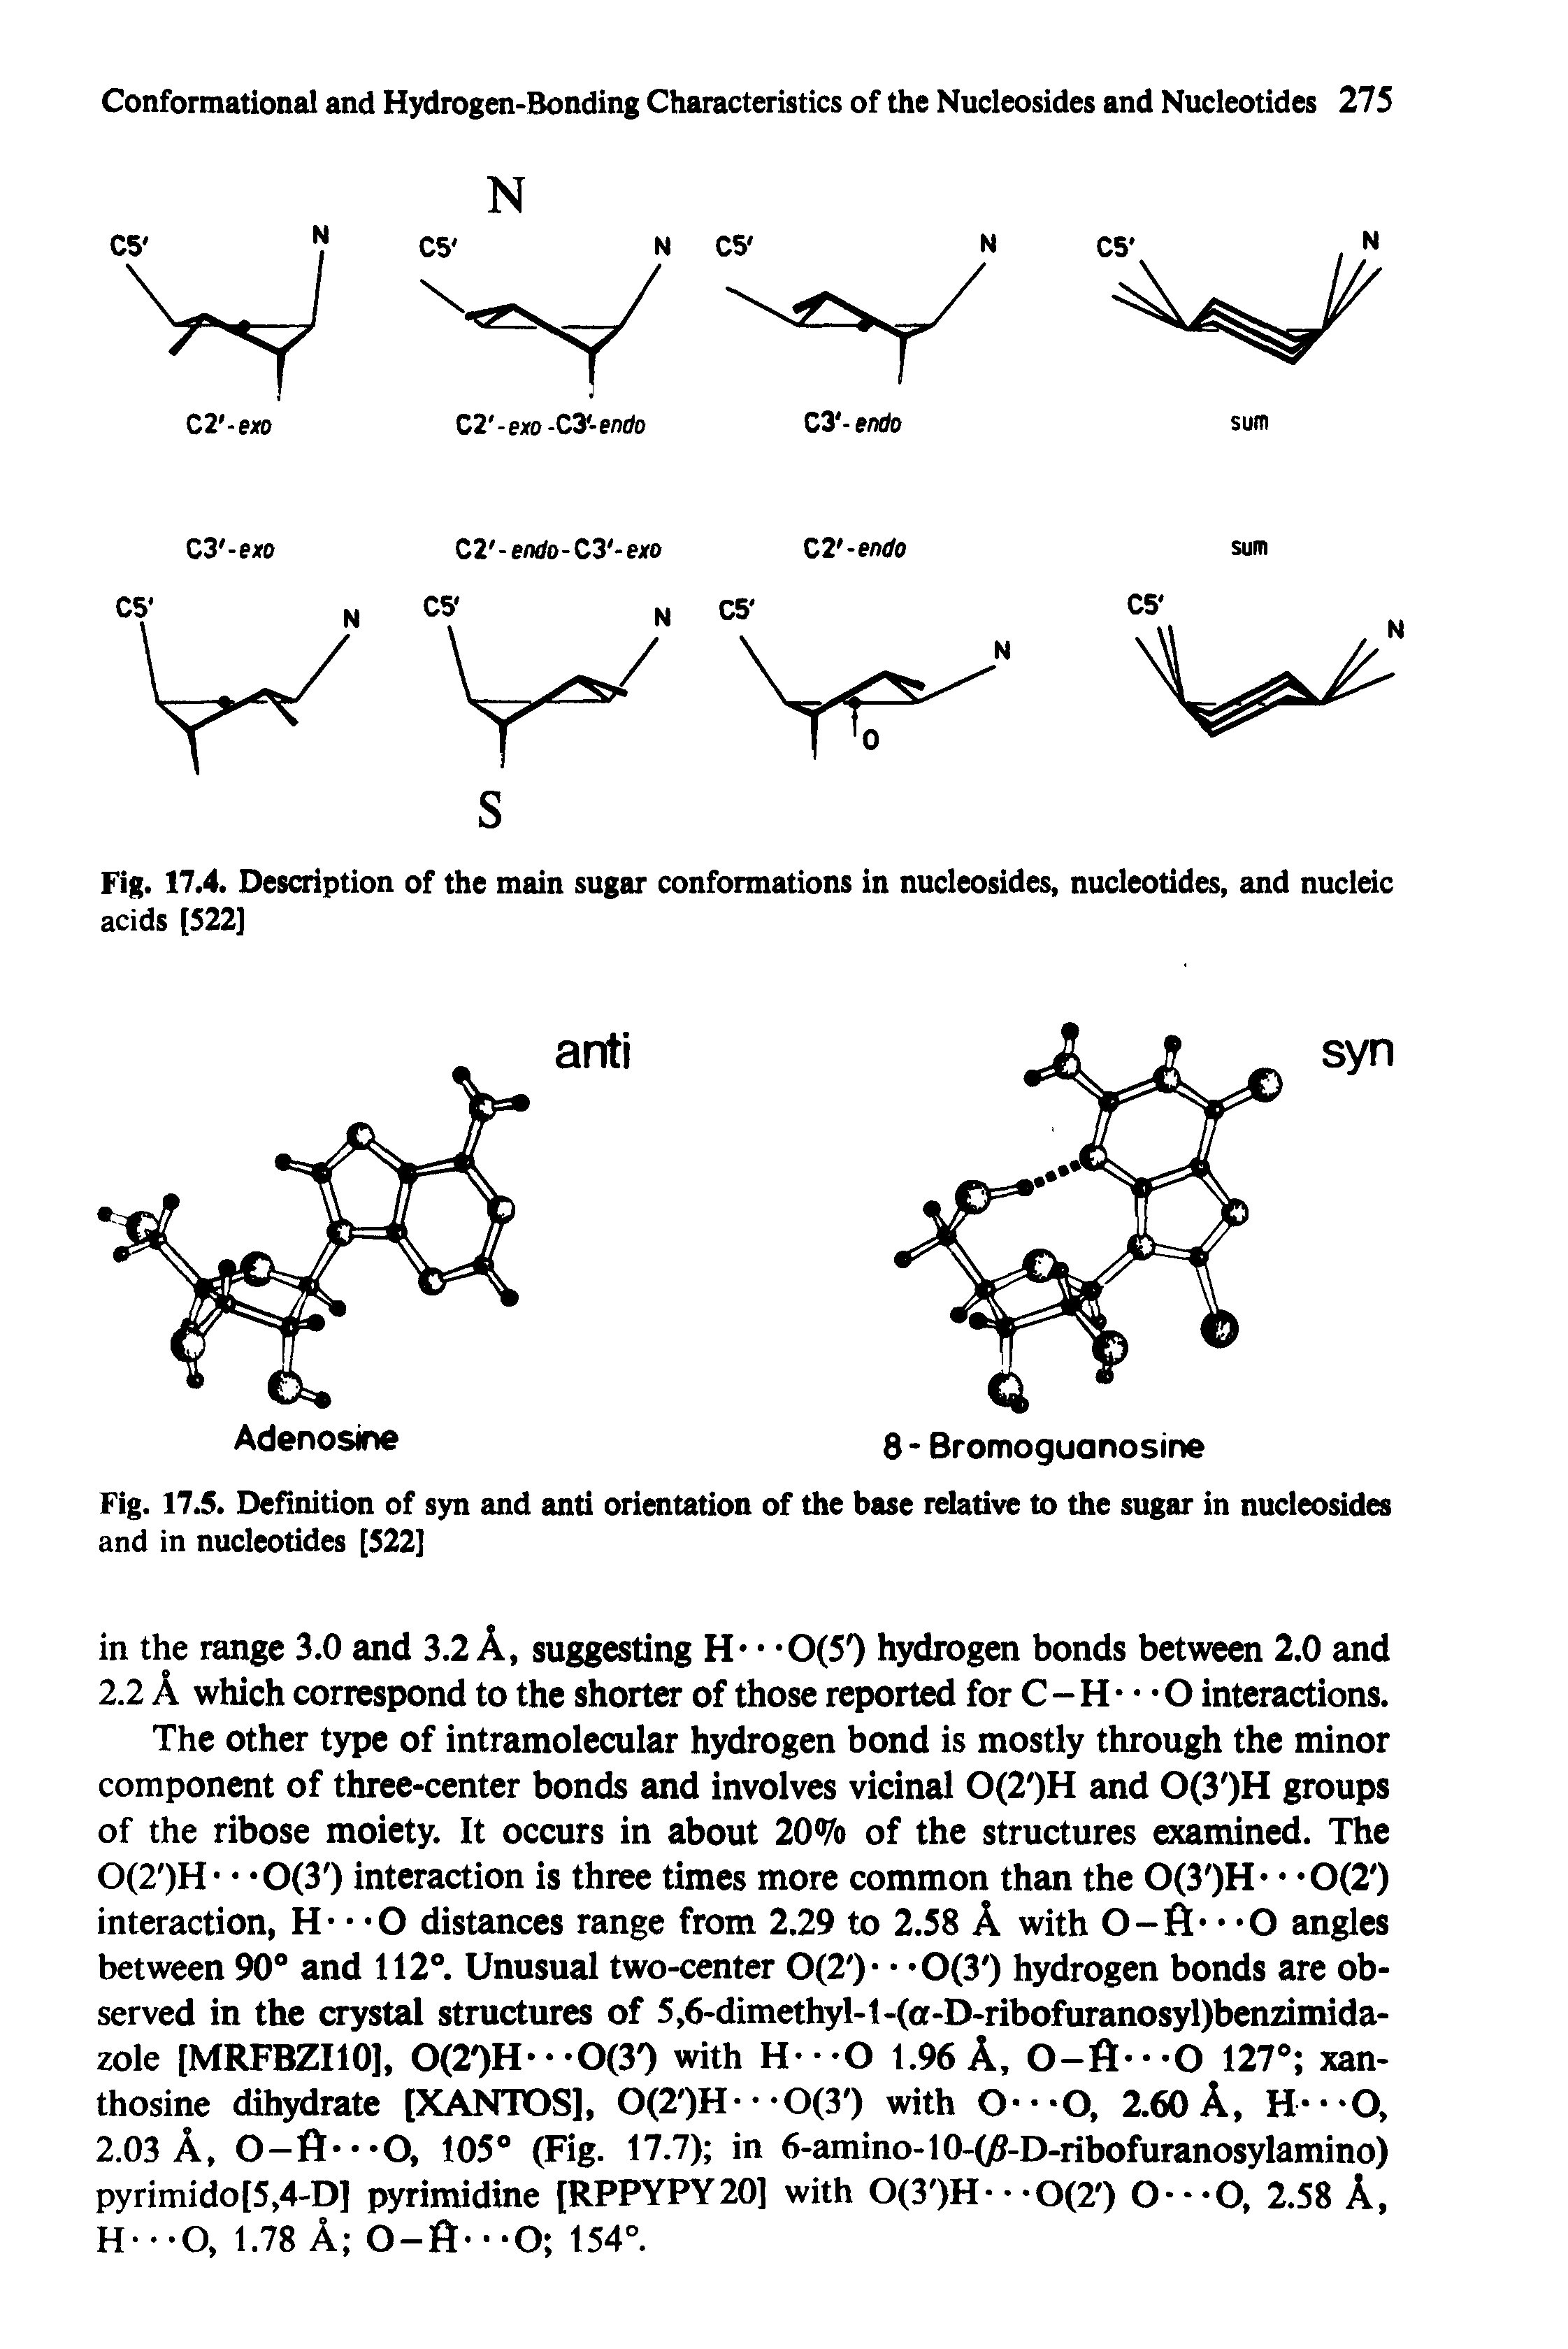 Fig. 17.4. Description of the main sugar conformations in nucleosides, nucleotides, and nucleic acids [522]...